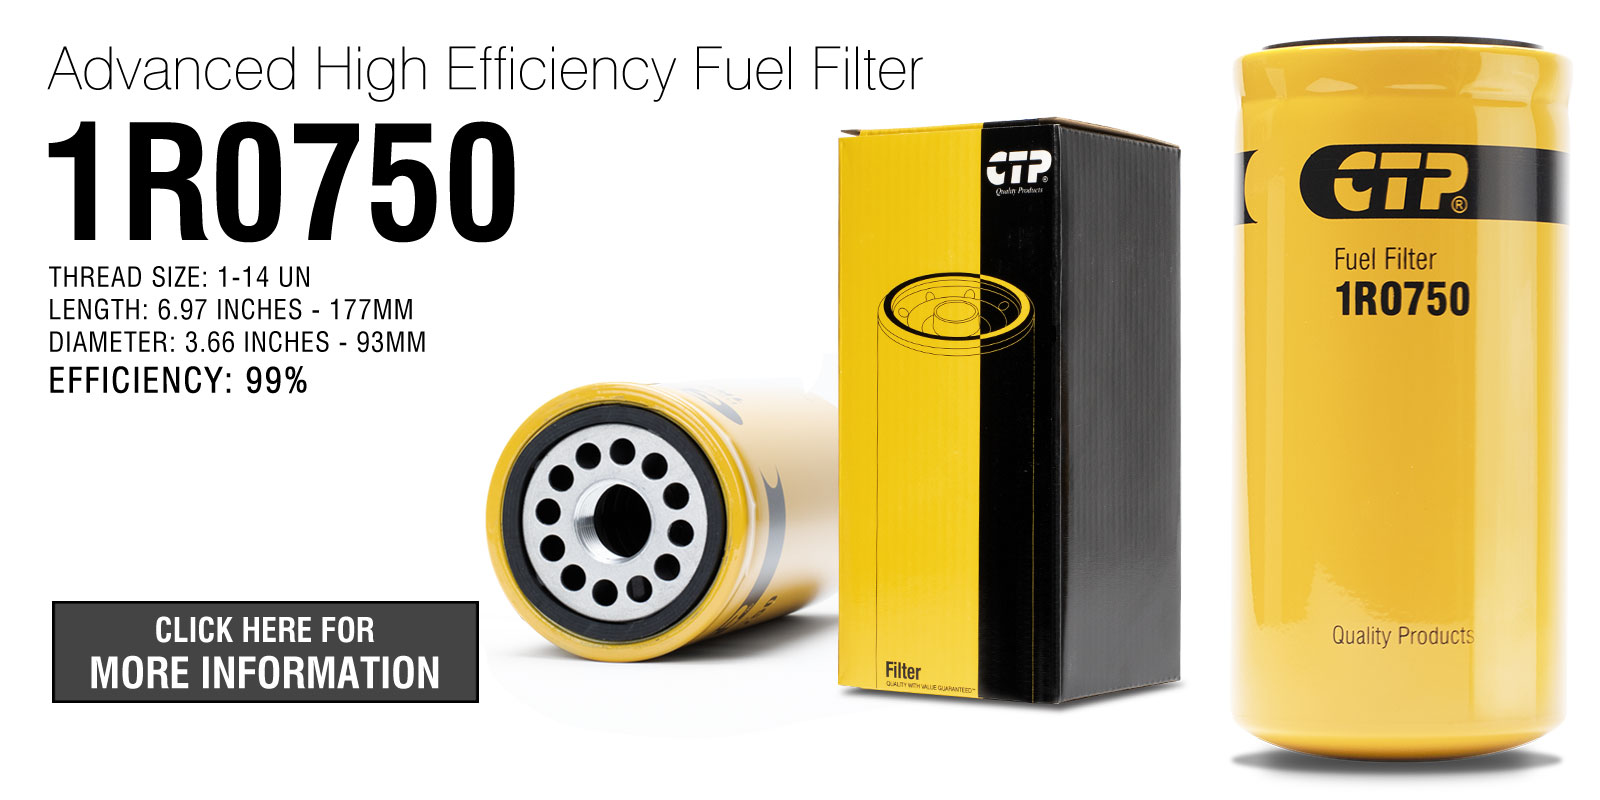 Quality Equivalent to the CAT 1R-0750 Fuel Filter 